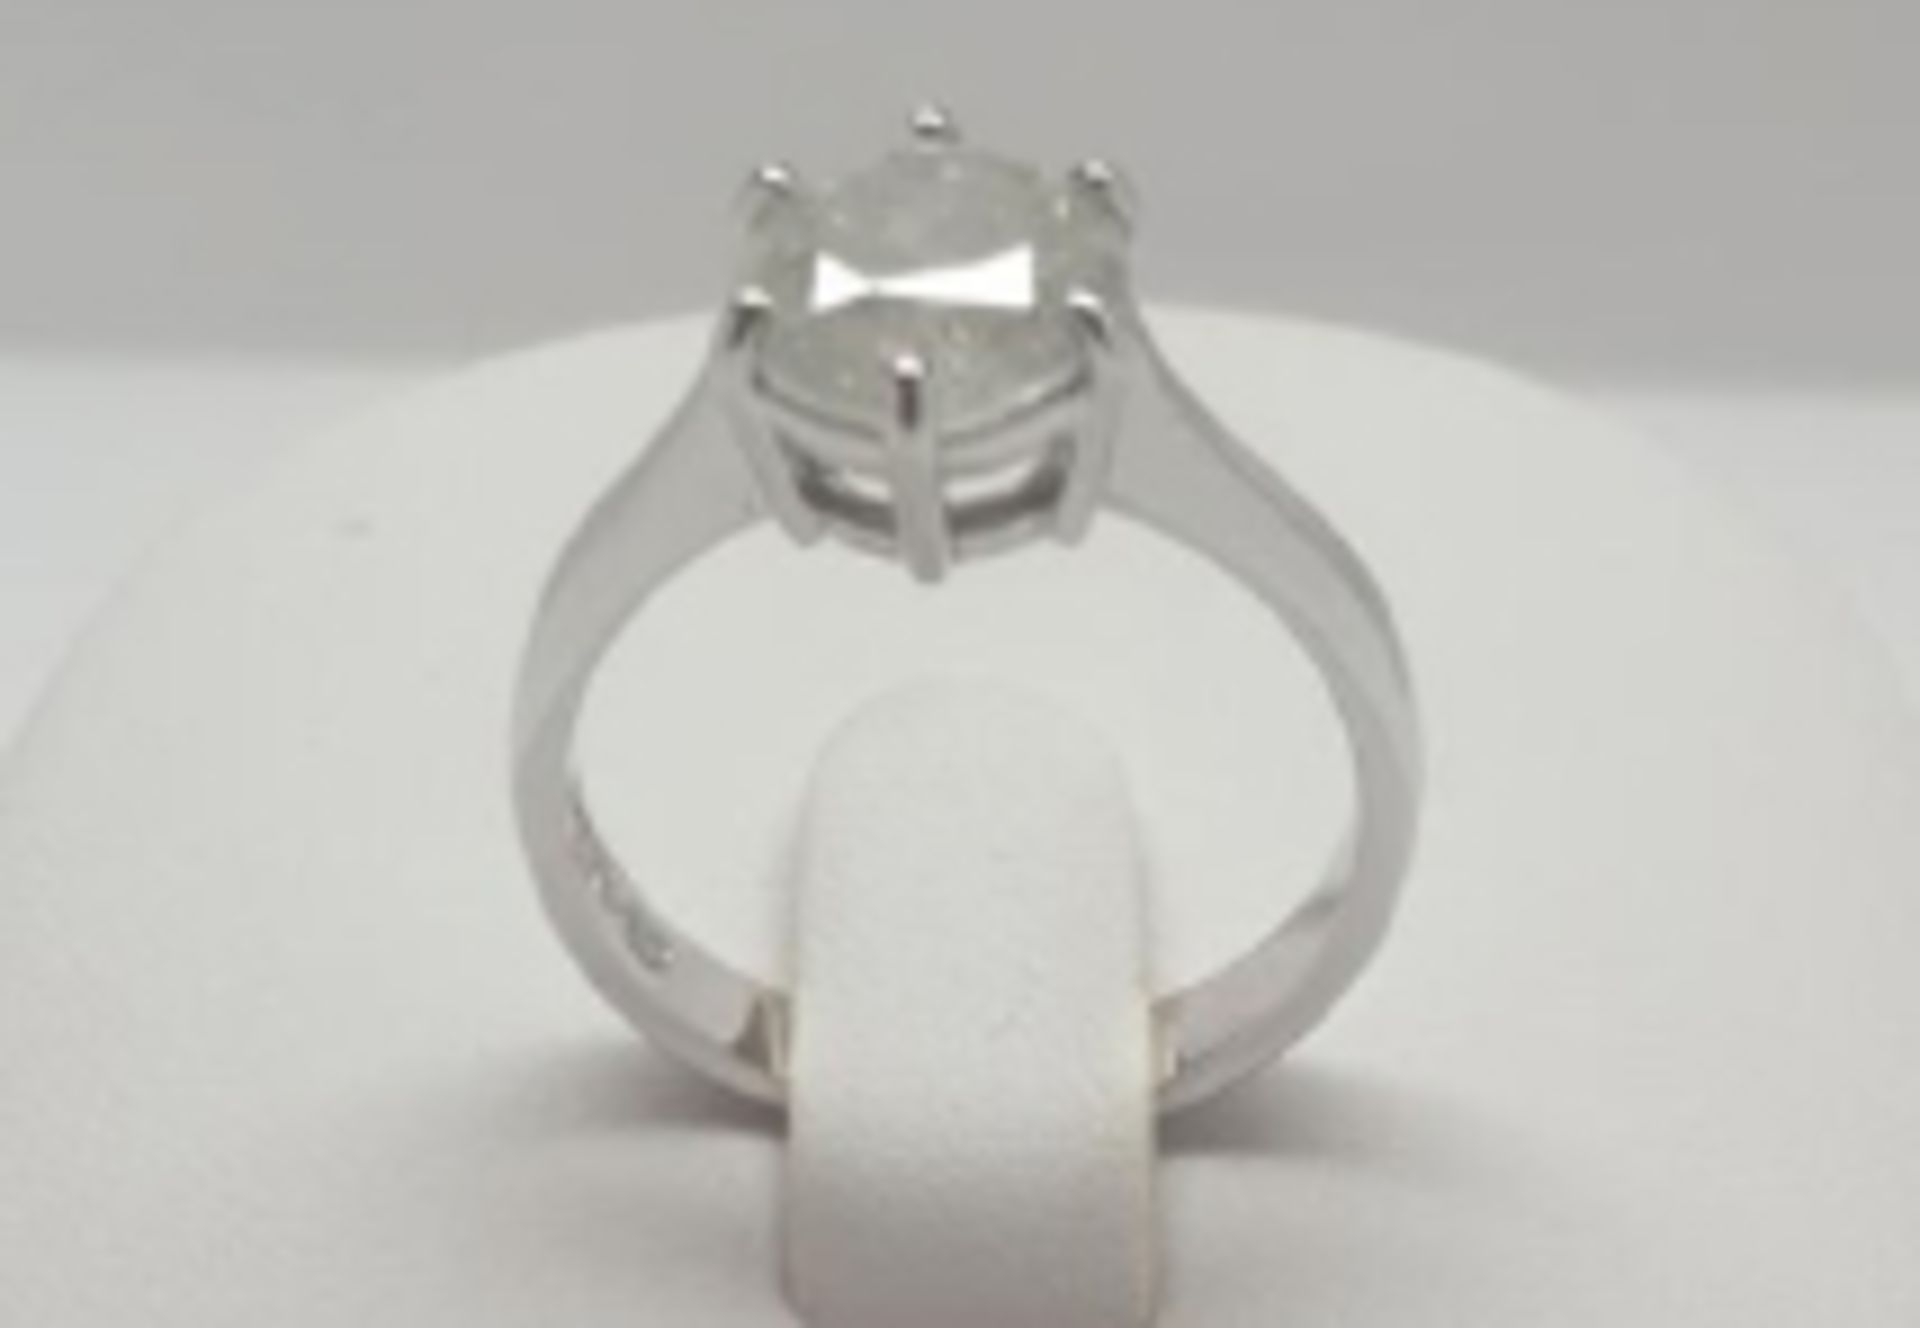 A 2 Carat Solitaire Diamond Set in 14k white gold. A single stone set in a classic siz claw setting - Image 2 of 2